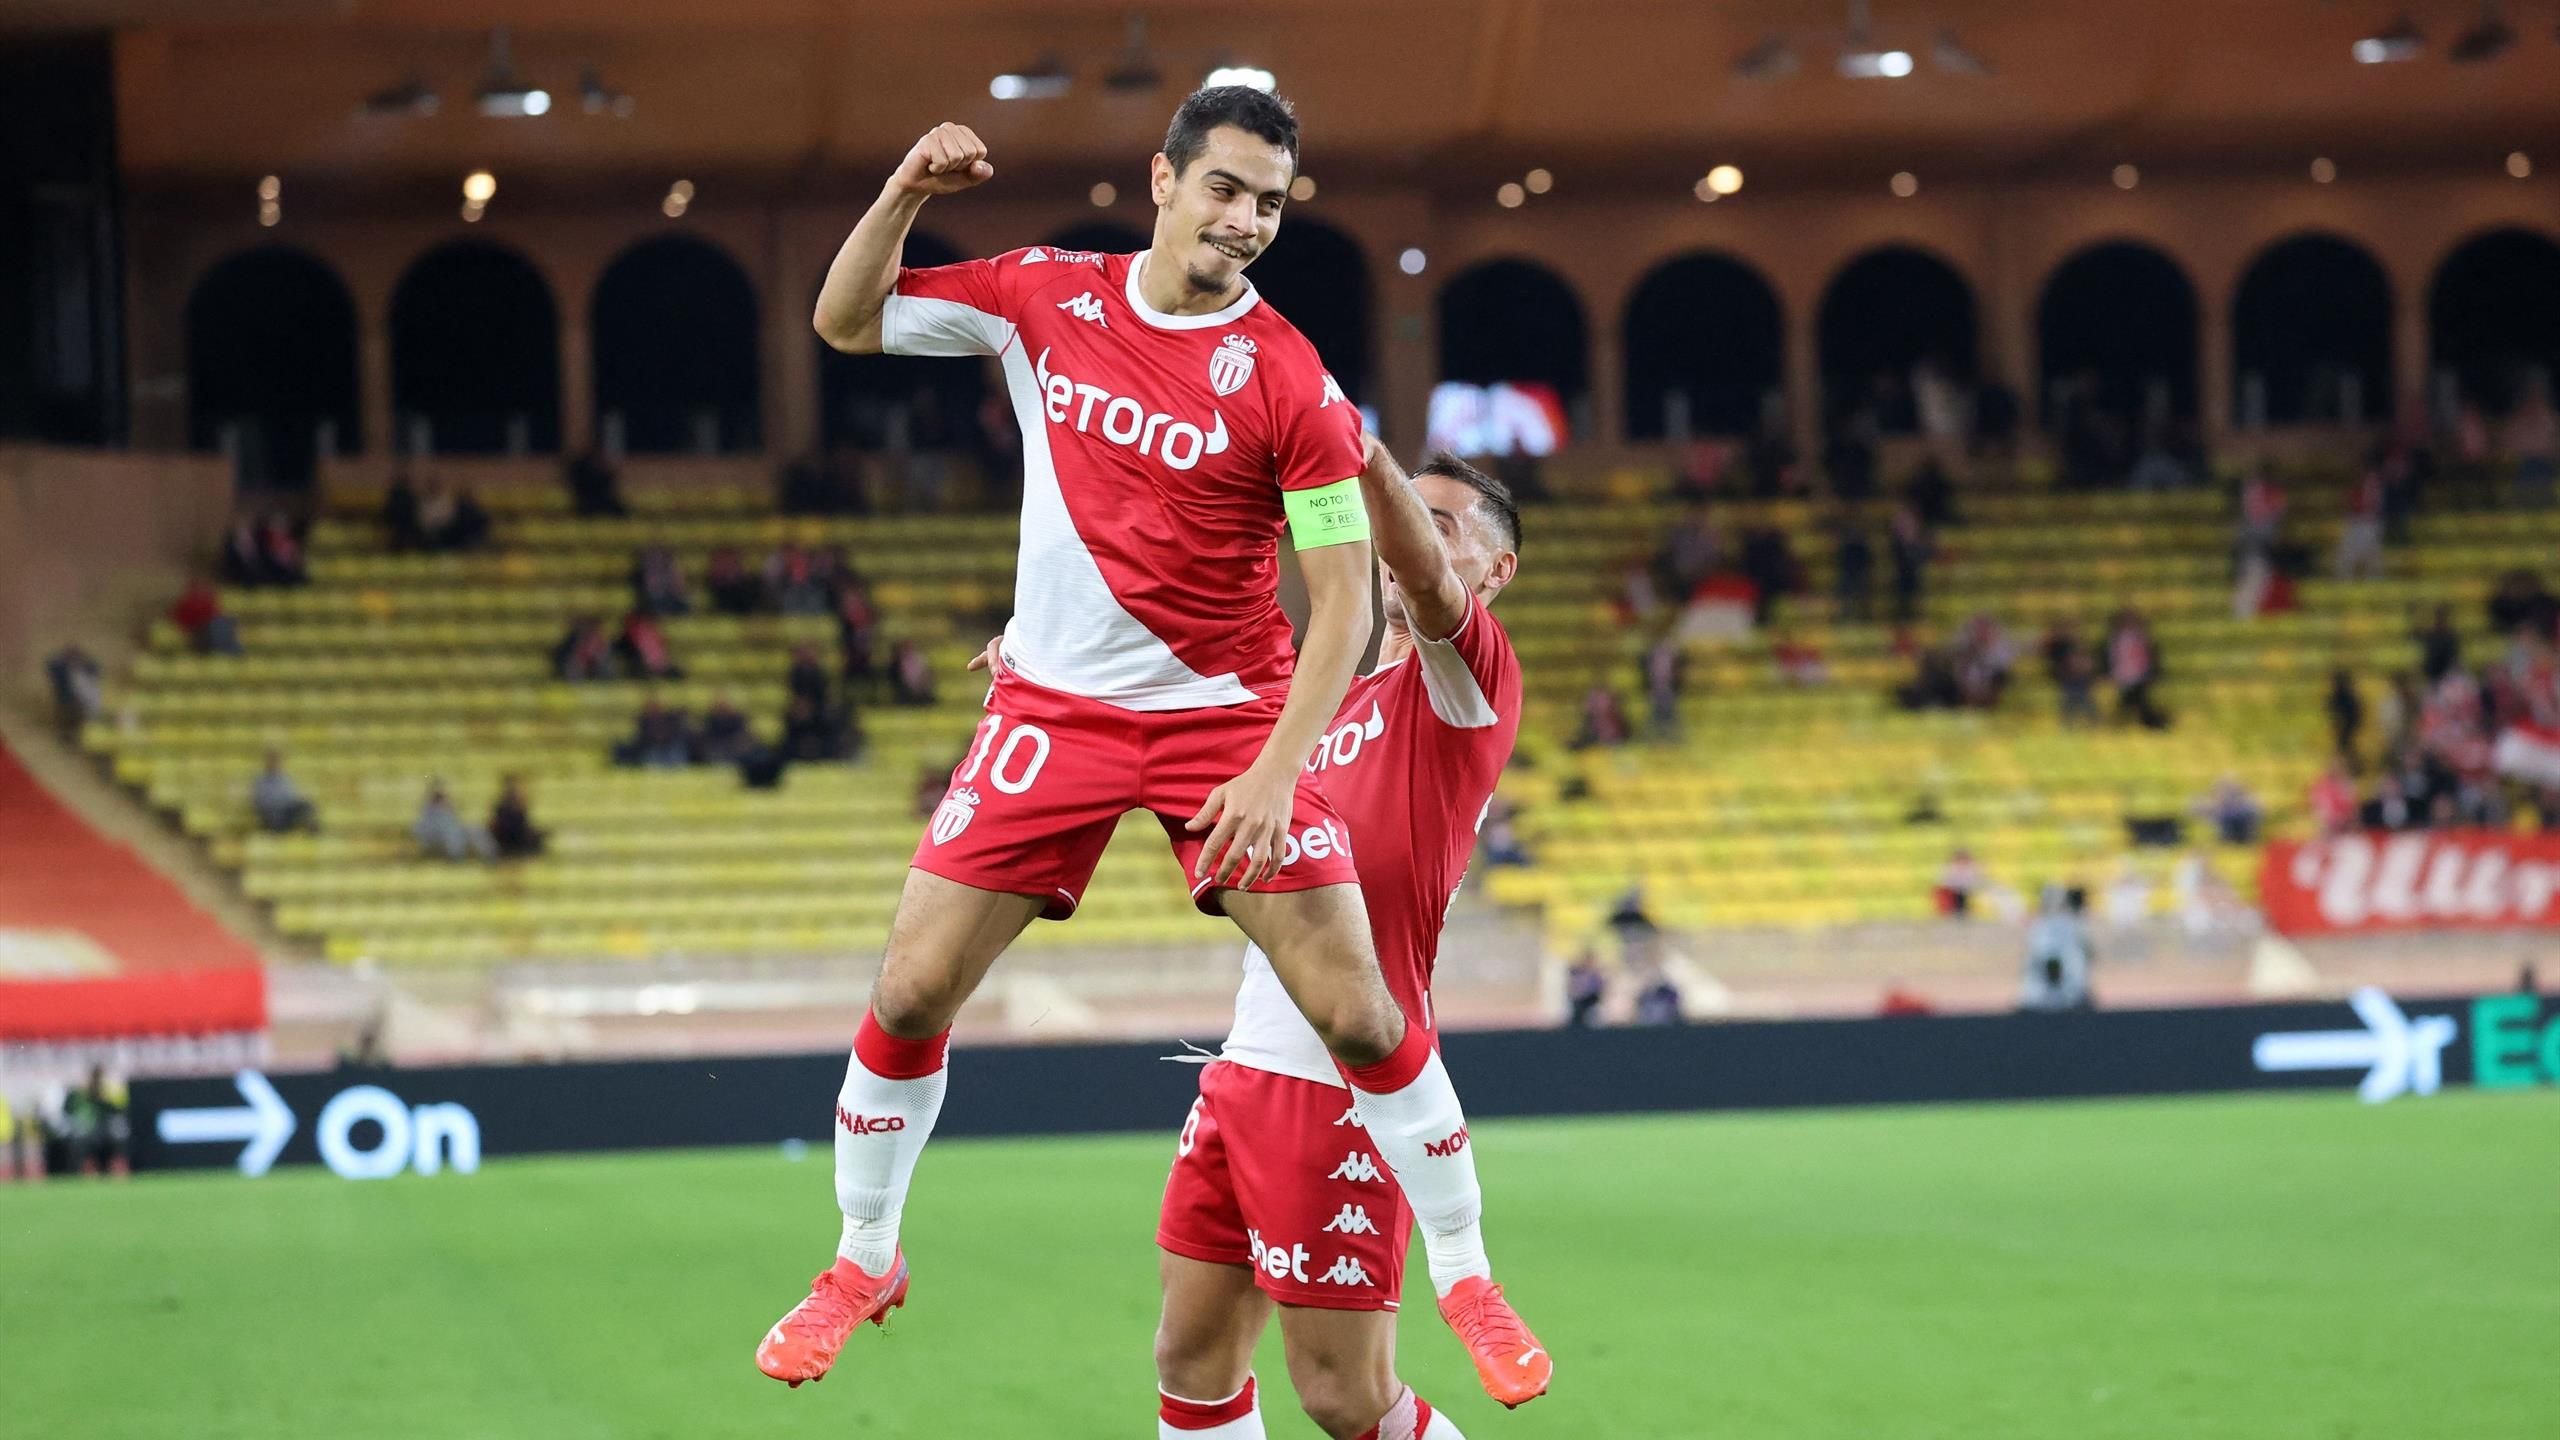 Wissam Ben Yedder (at the time of writing) is the top goalscorer in Ligue 1.